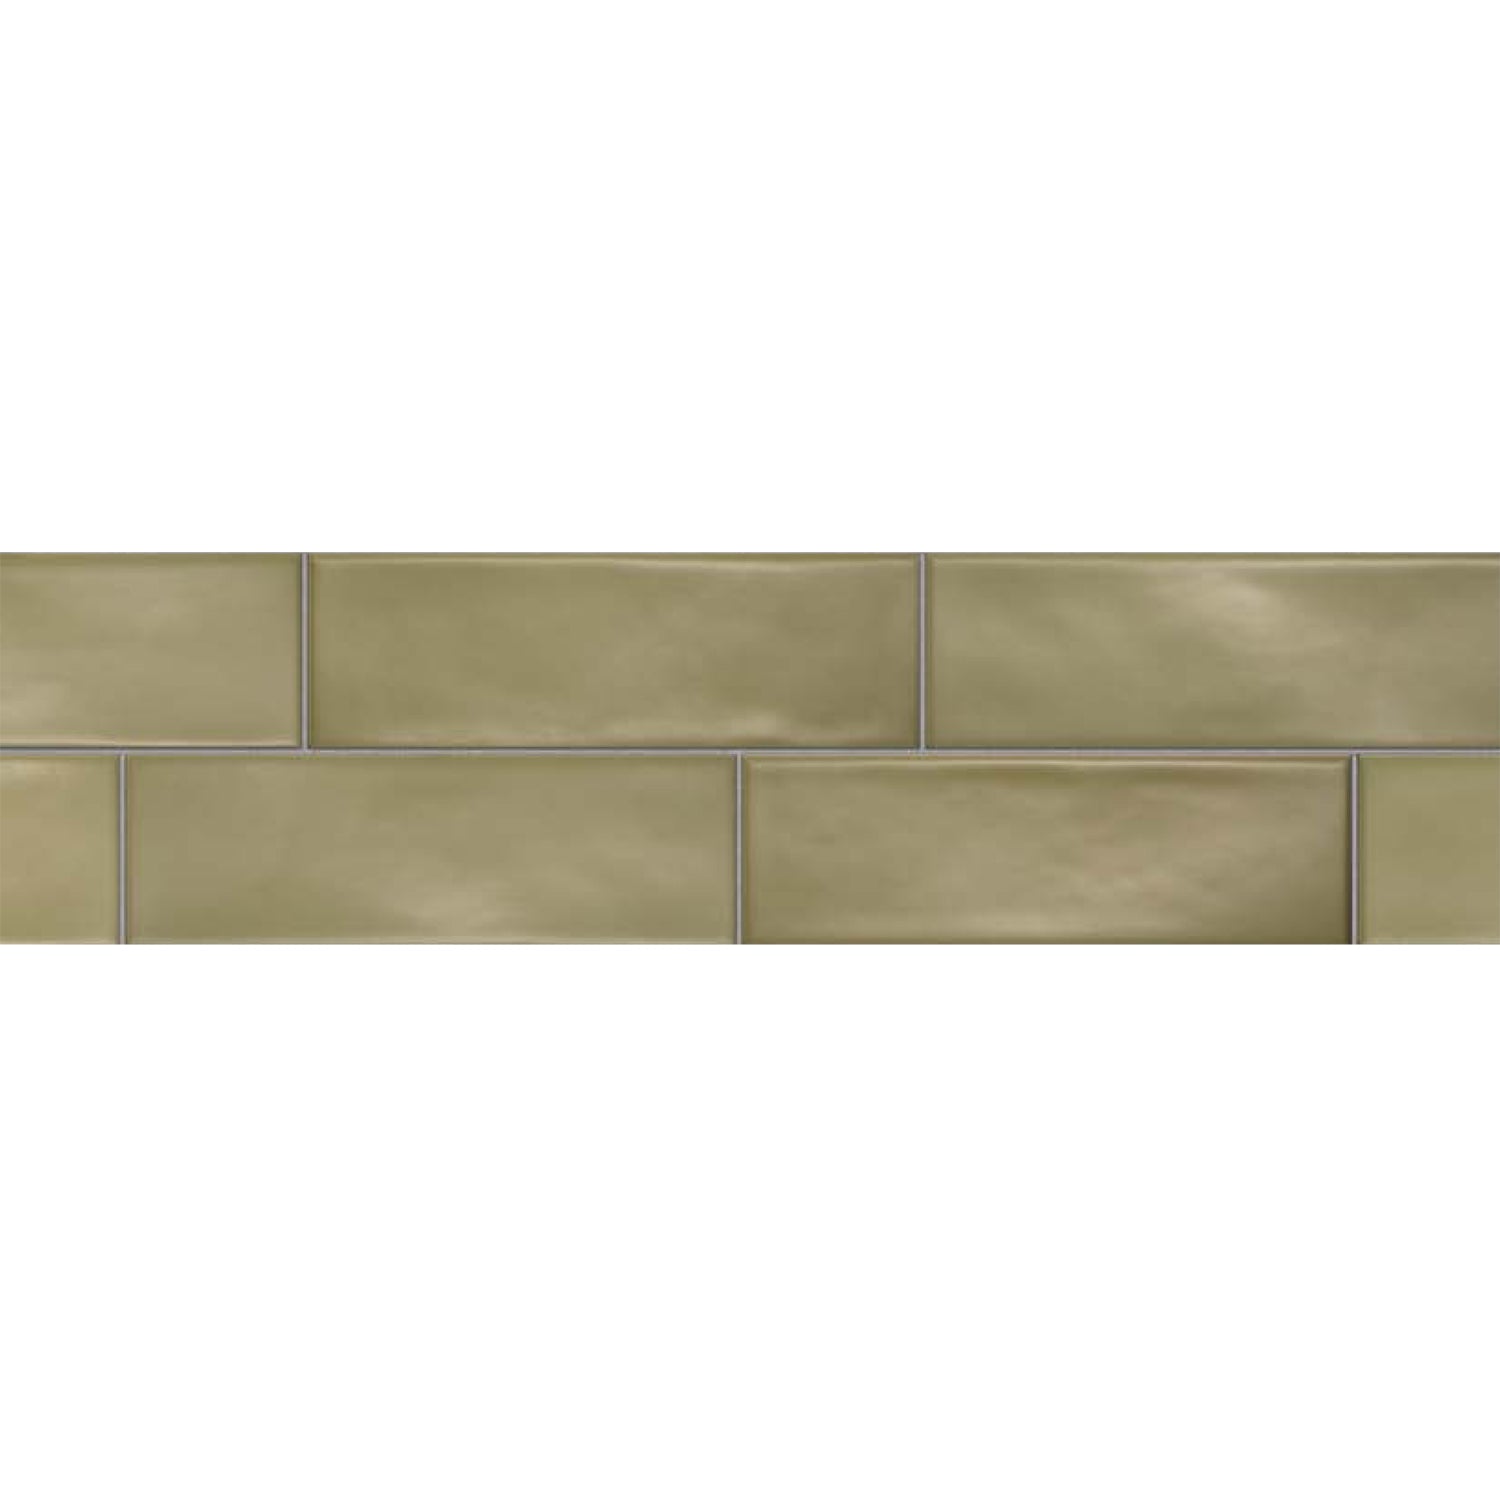 Topcu - Chalky - 2.5 in. x 8 in. Ceramic Wall Tile - Olive